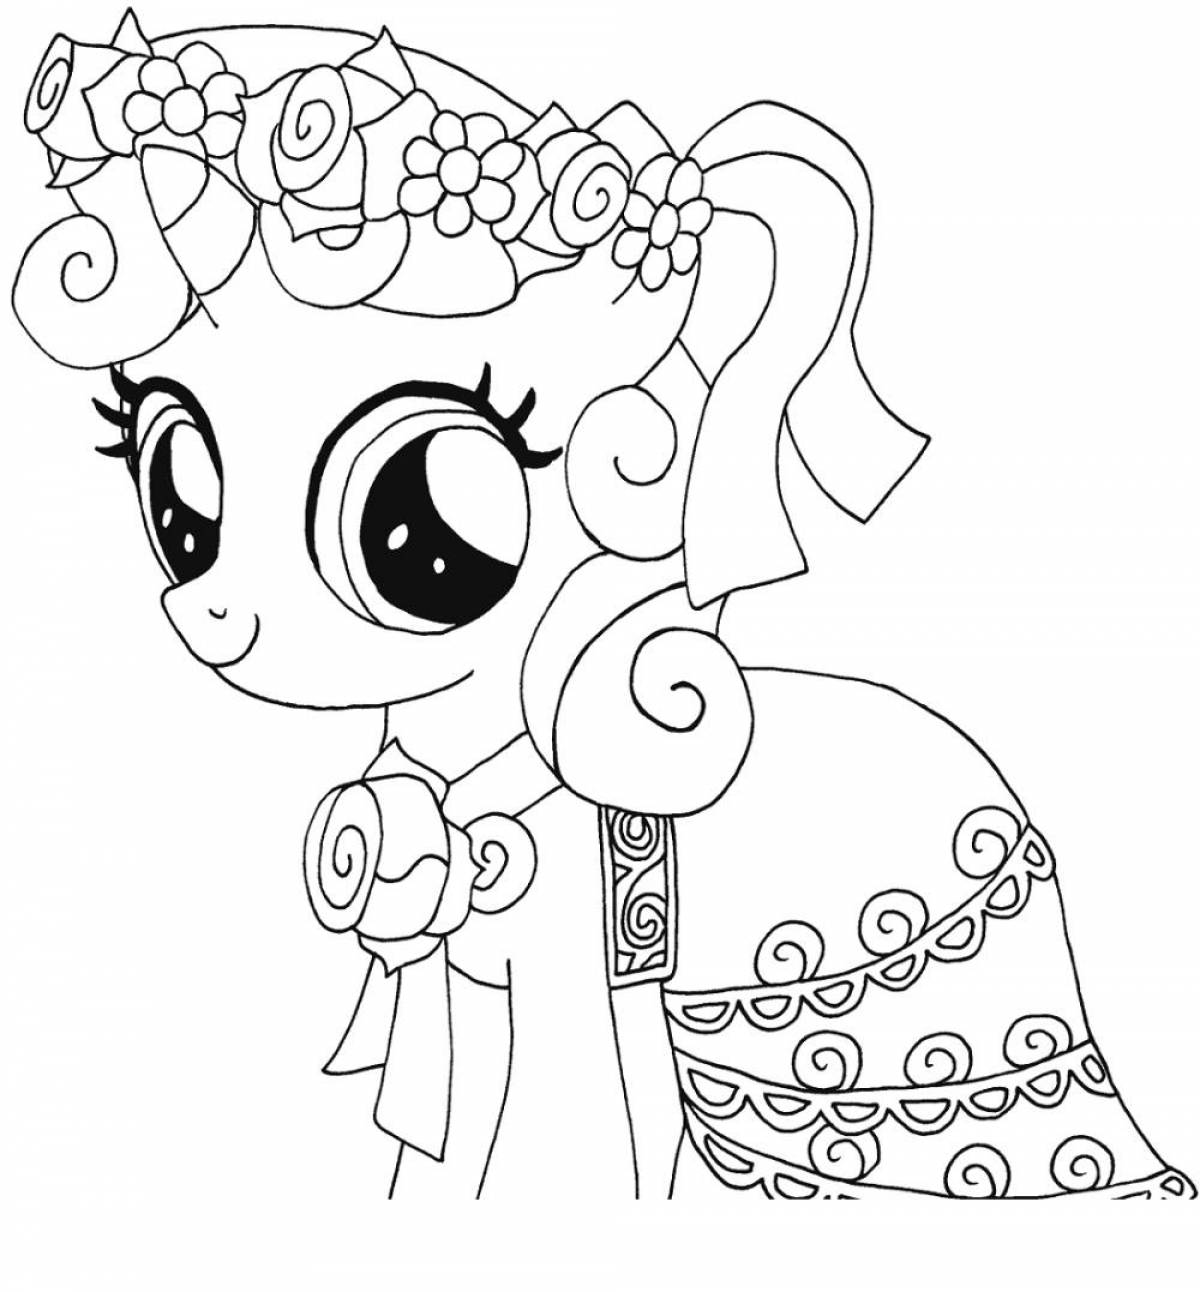 Refreshing pony coloring page